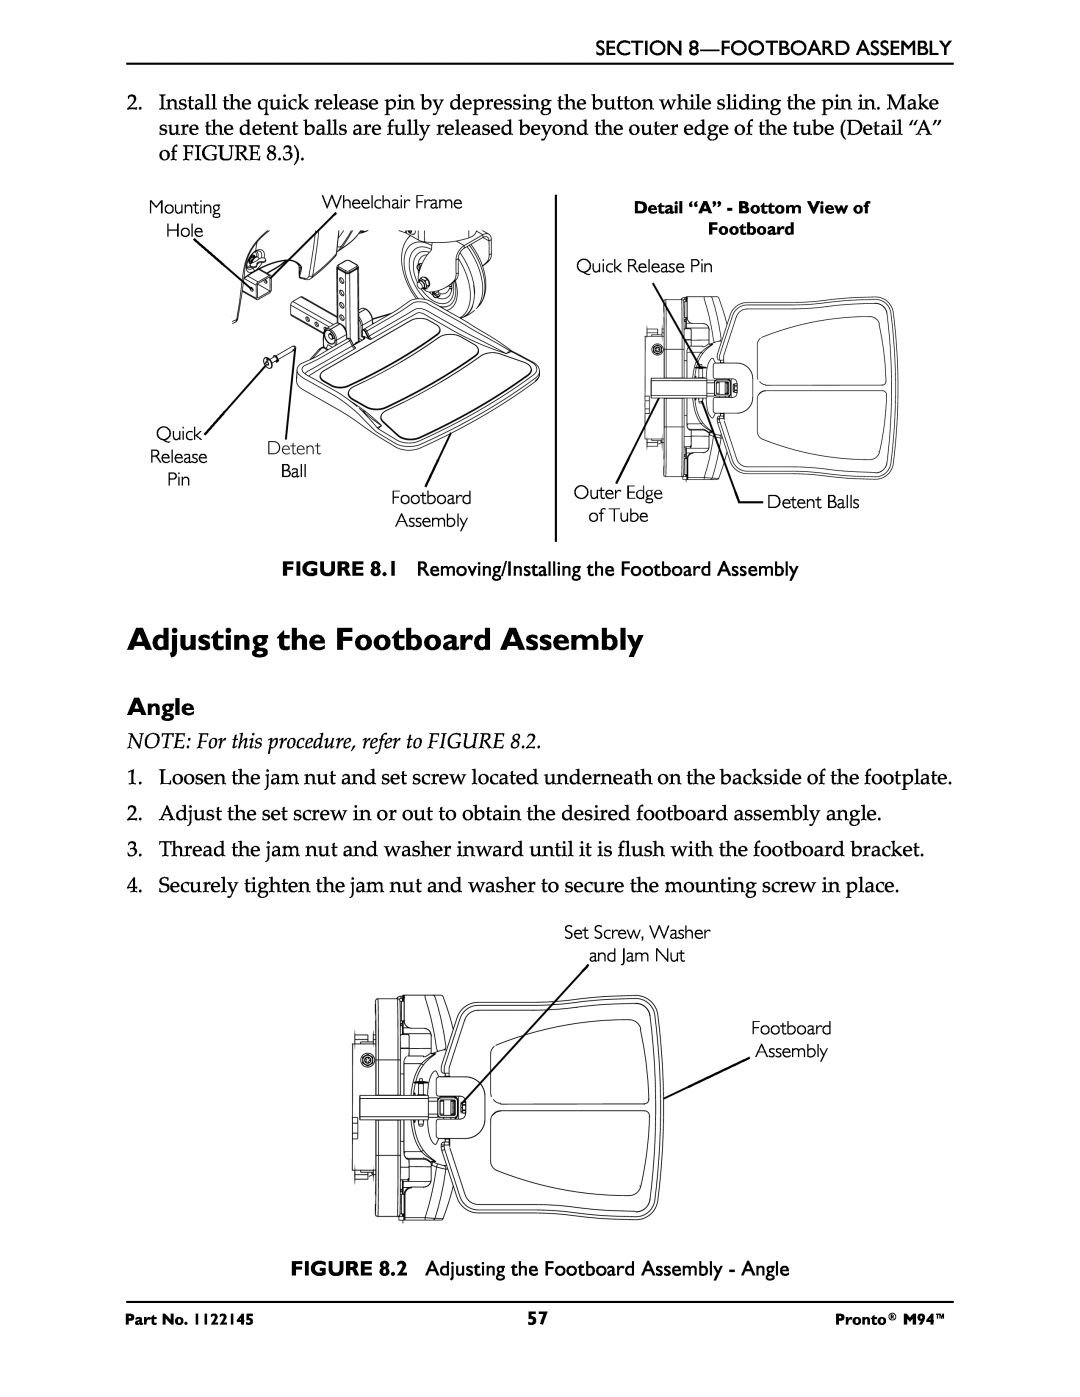 Invacare Pronto M71 manual Adjusting the Footboard Assembly, Release, Ball 